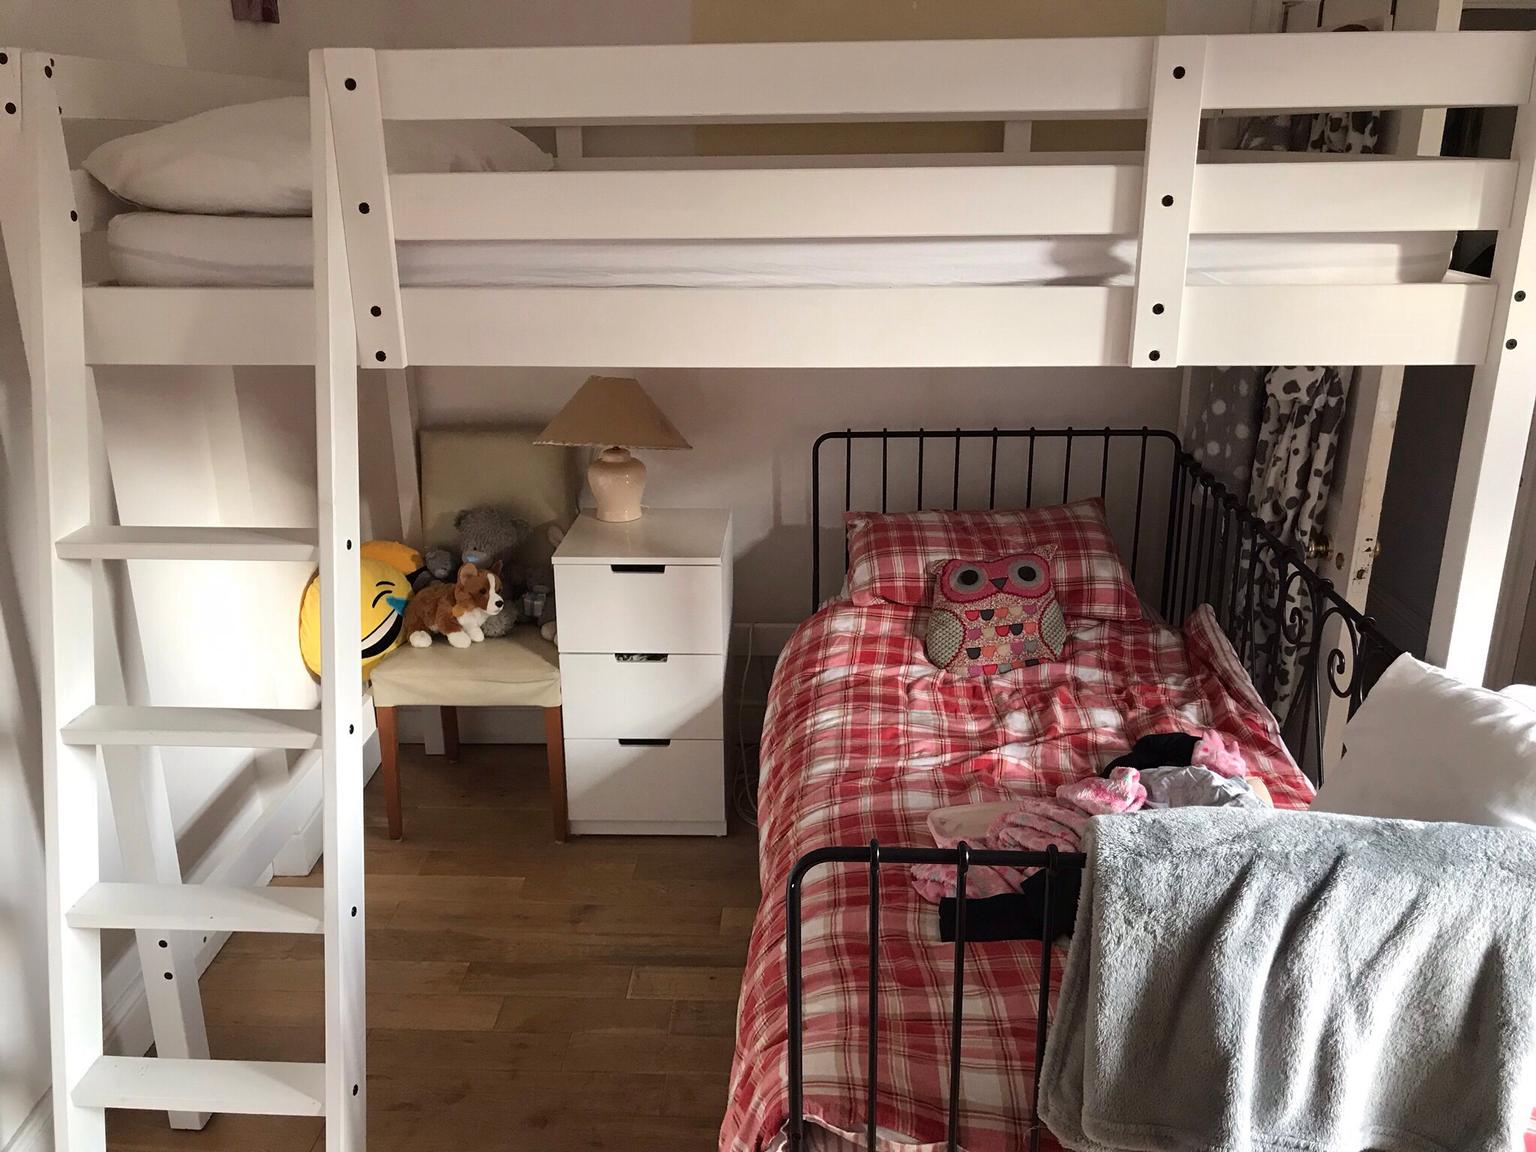 Ikea Stora Loft Bed Kids Bunk Sky Double Bed In Cr6 Warlingham For 150 00 For Sale Shpock